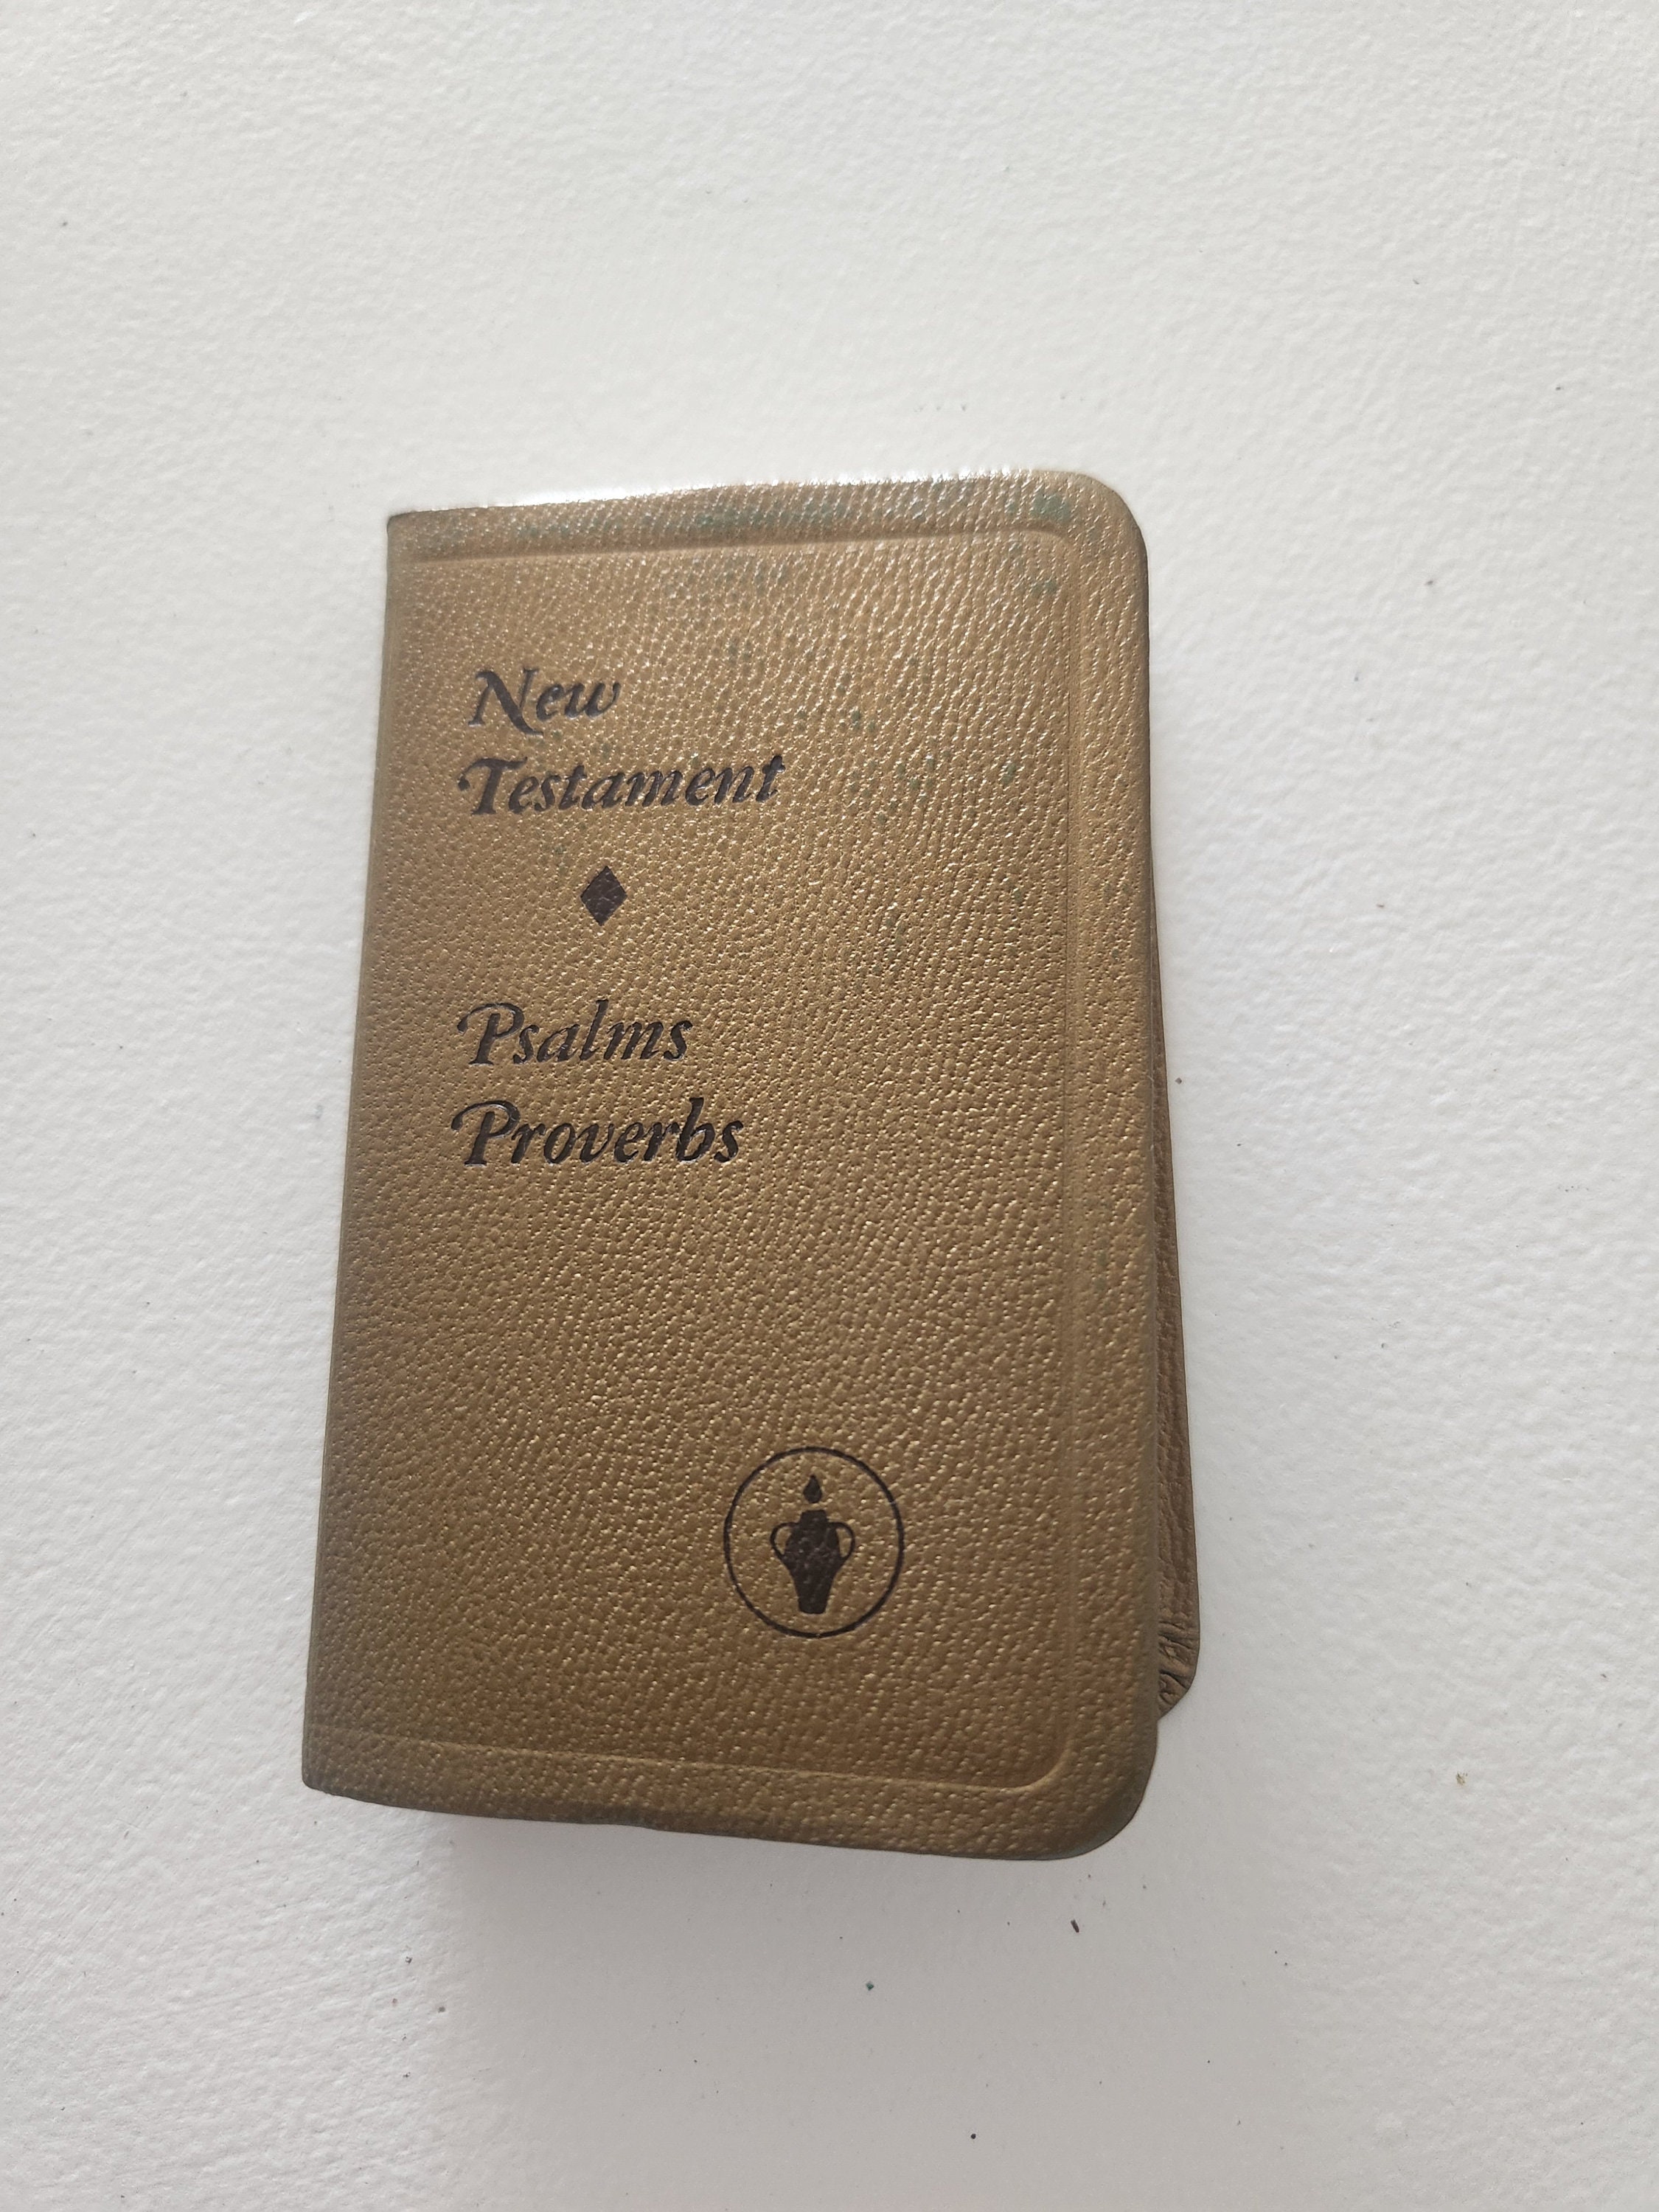 Vintage New Testament Psalms Proverbs. Catholic Book, Gold Small Bible,  Religious Stories, Bible Pages, Pocket Size Bible, Vintage Bibles. 